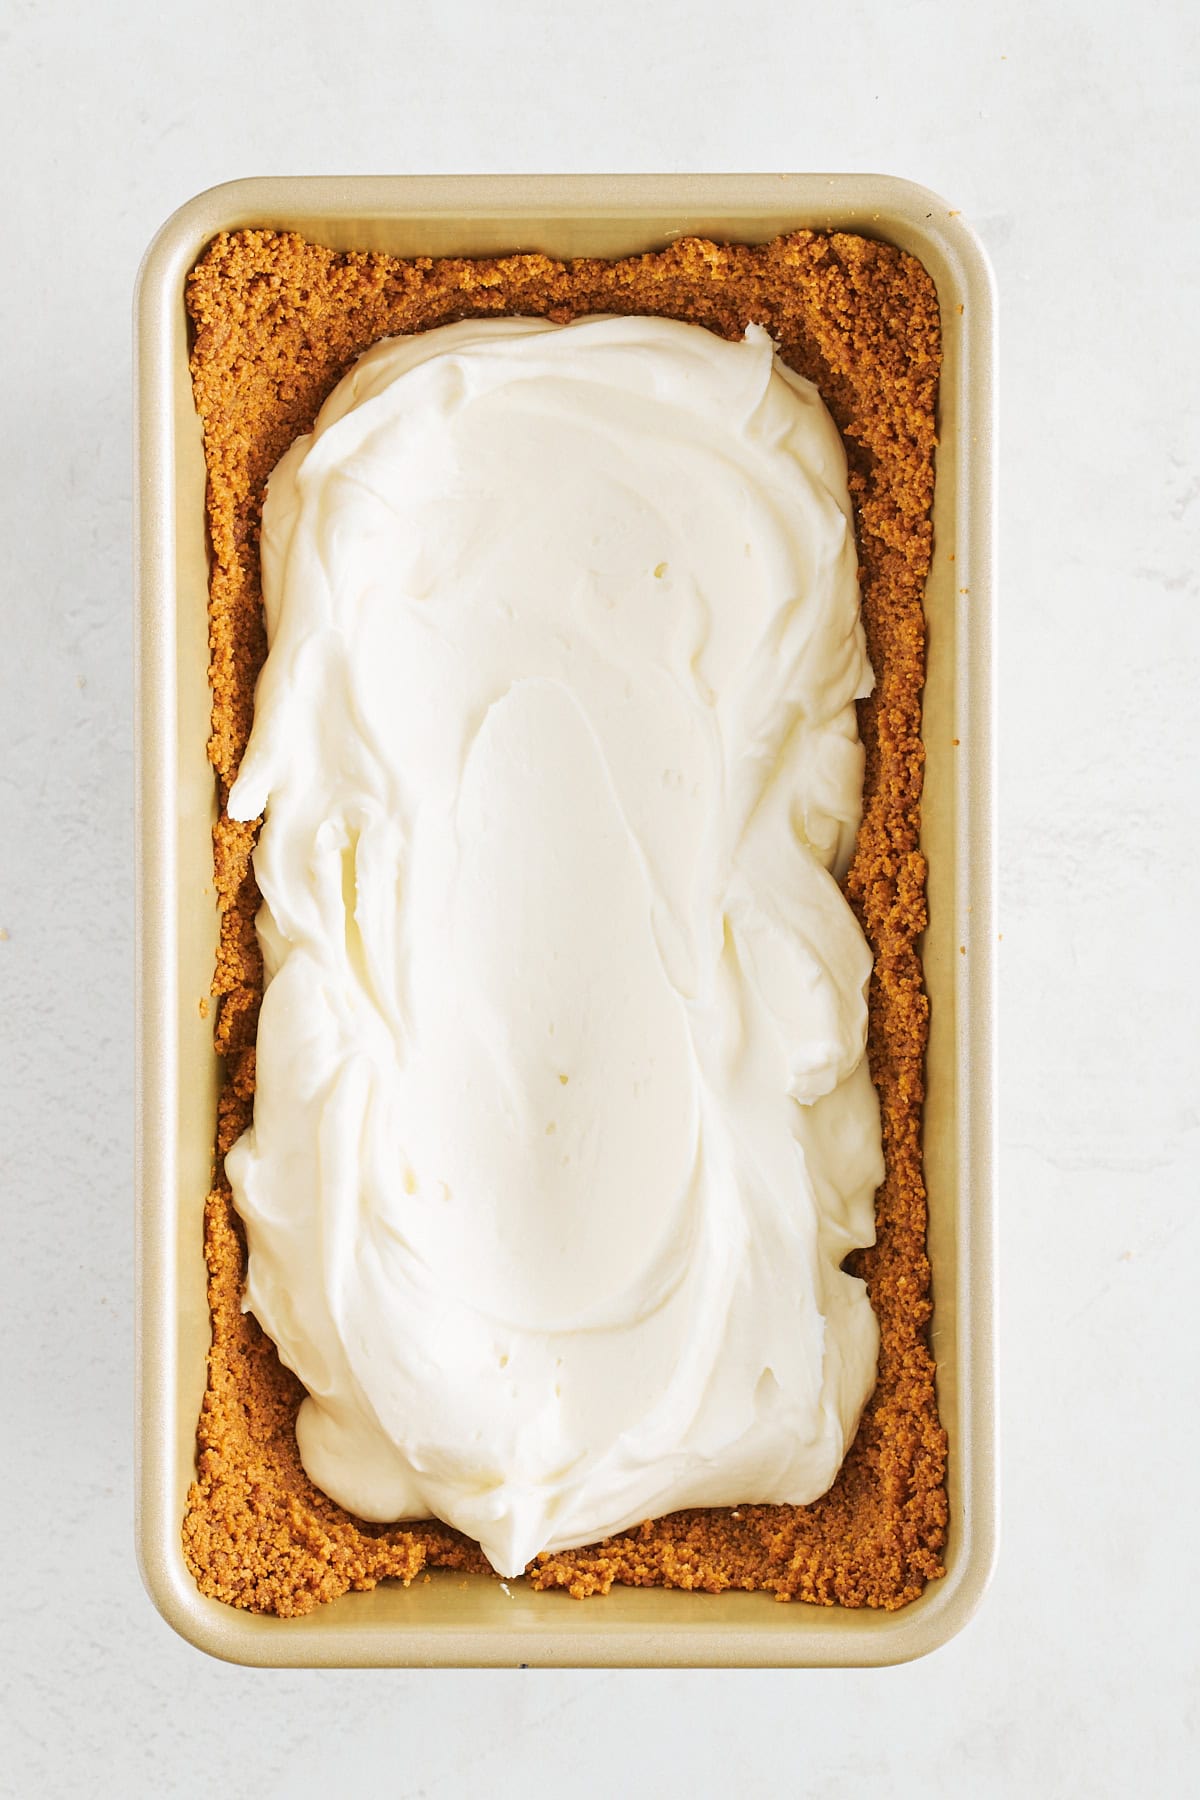 Cheesecake filling pressed into a Biscoff cookie crust in a loaf pan. 